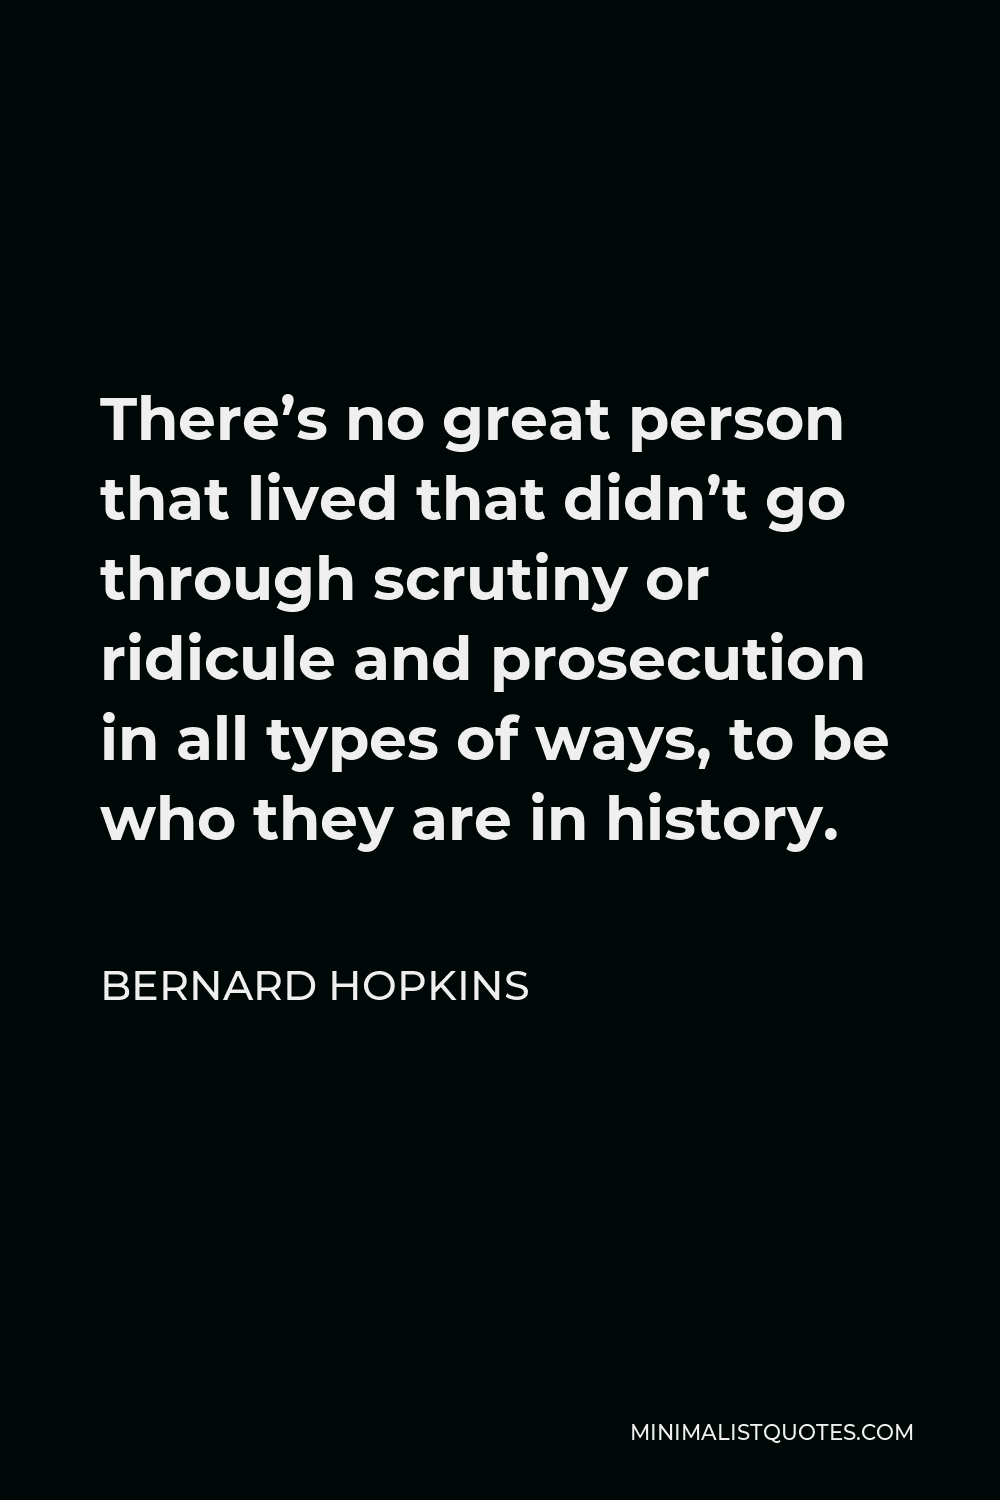 Bernard Hopkins Quote - There’s no great person that lived that didn’t go through scrutiny or ridicule and prosecution in all types of ways, to be who they are in history.